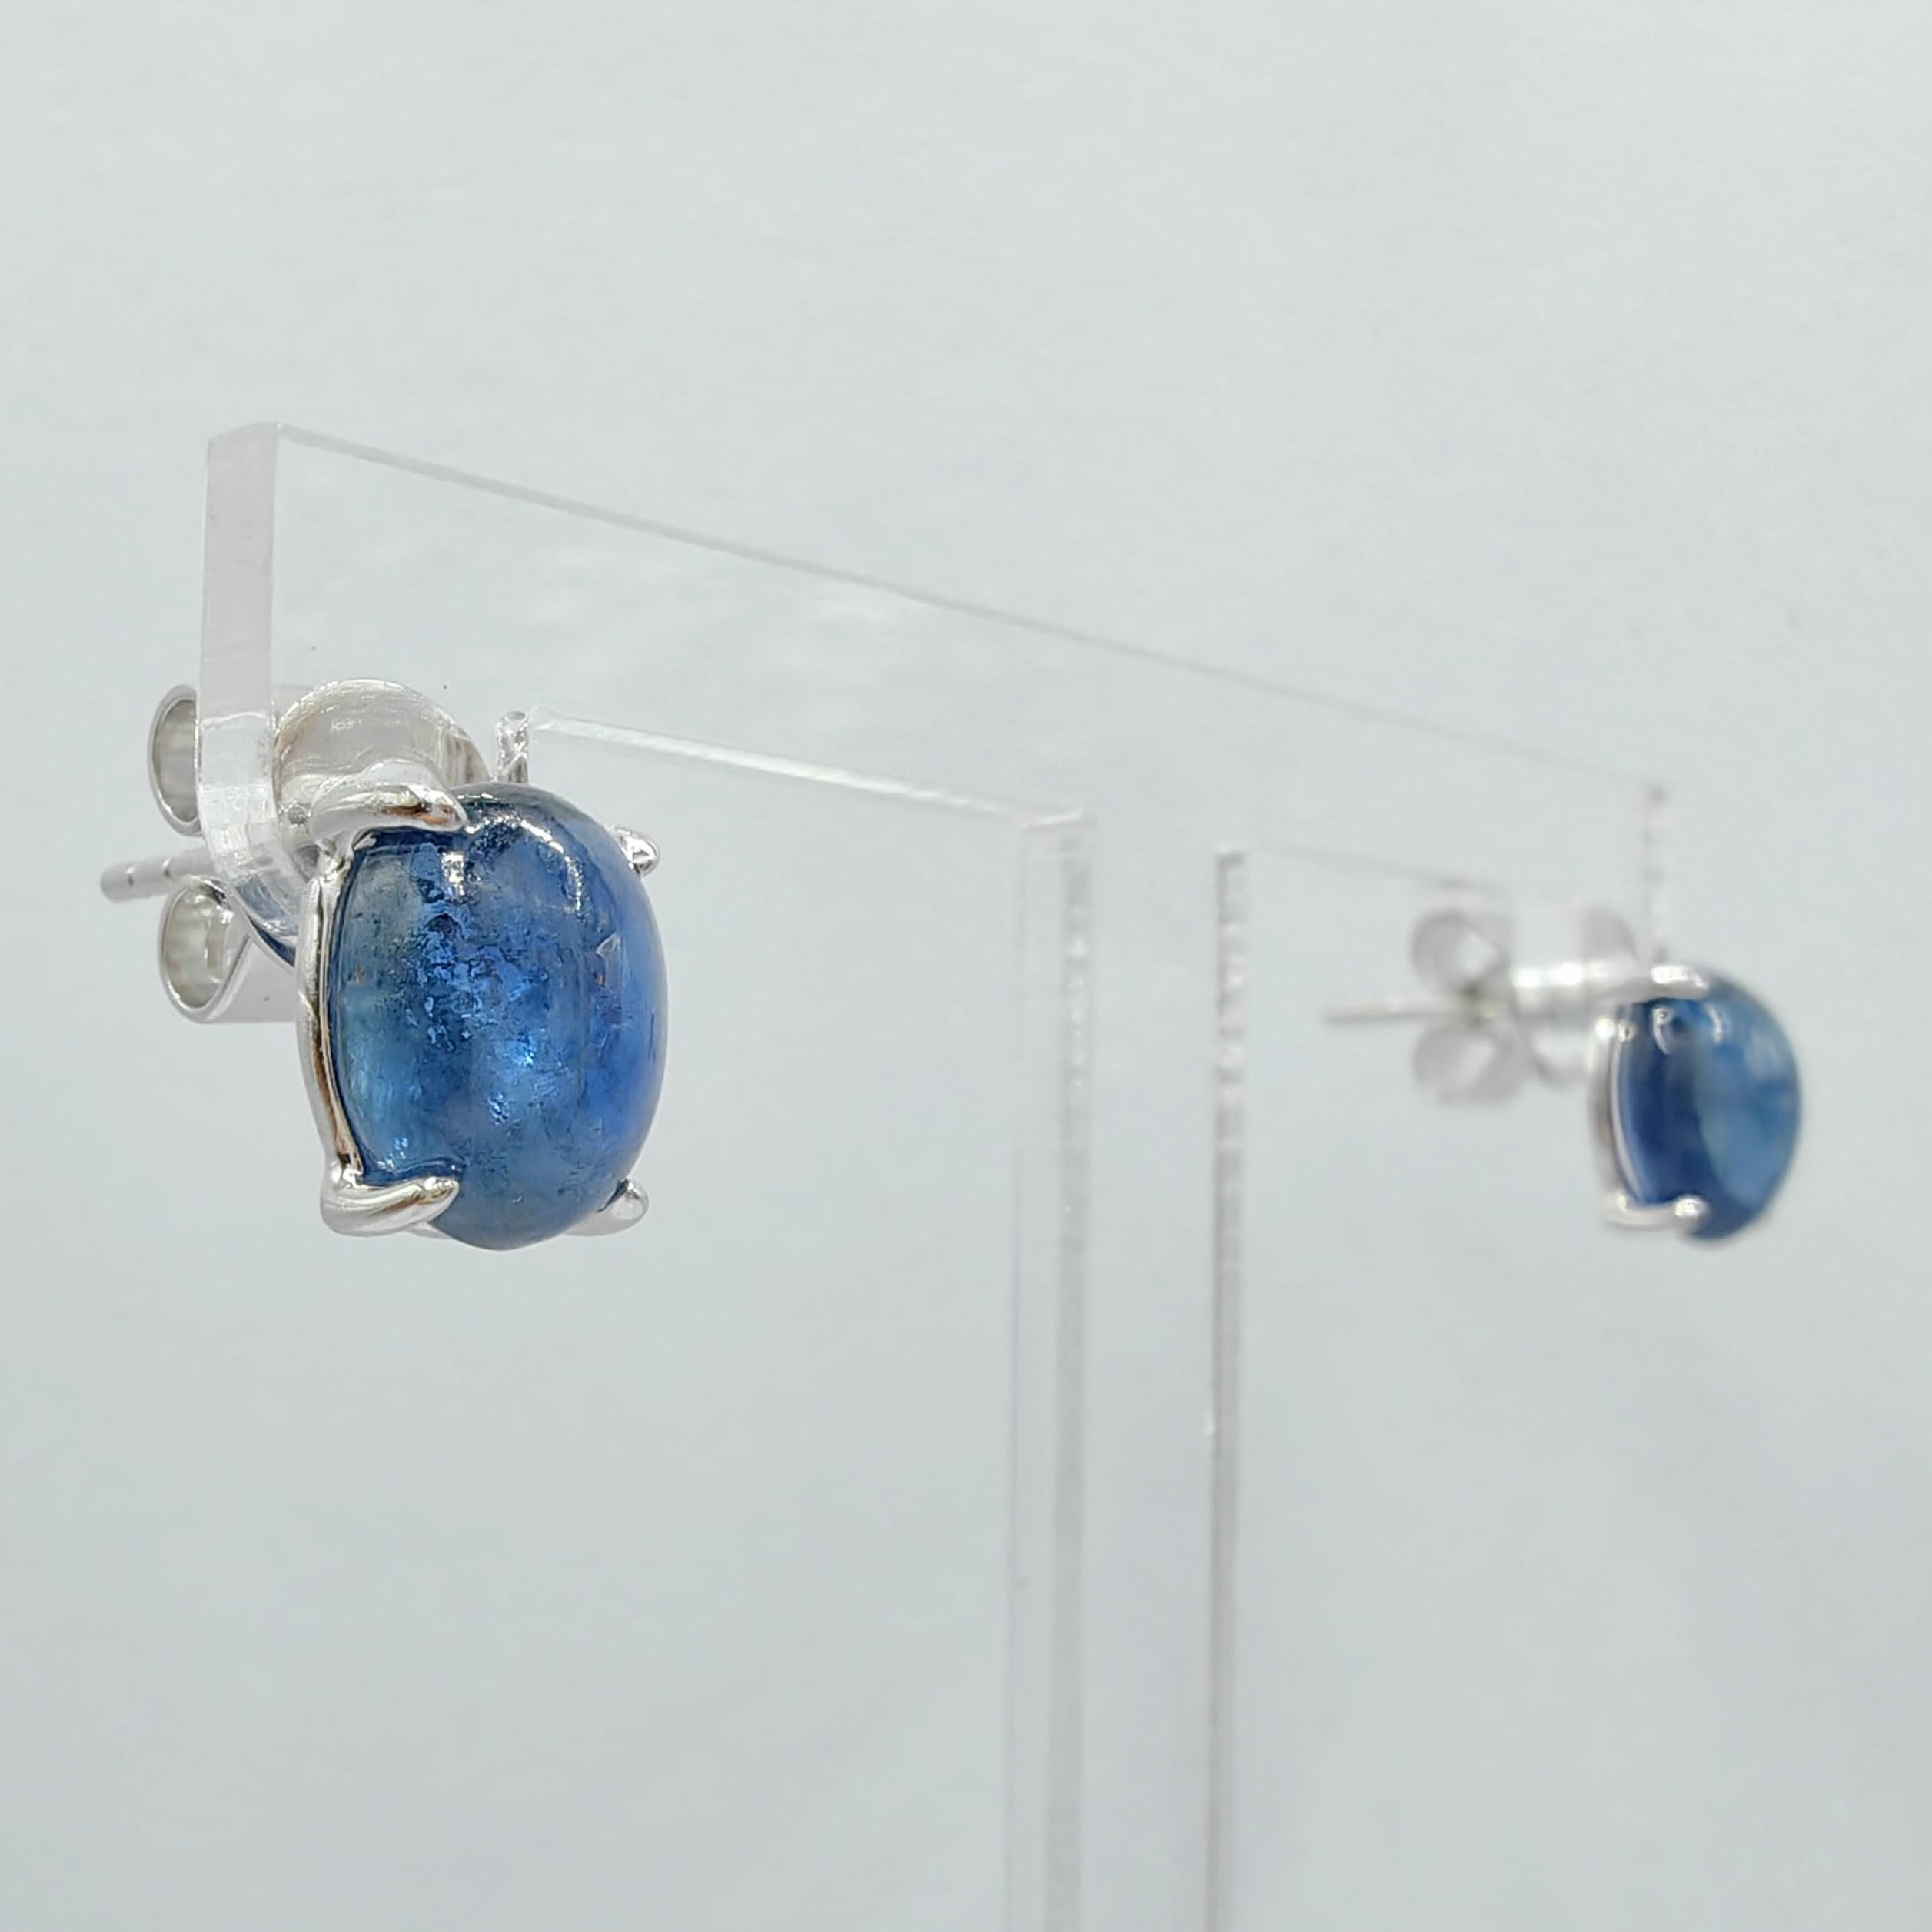 Matched 4.67 Carat 8x6mm Cabochon Blue Sapphire Stud Earrings in 18K White Gold For Sale 2